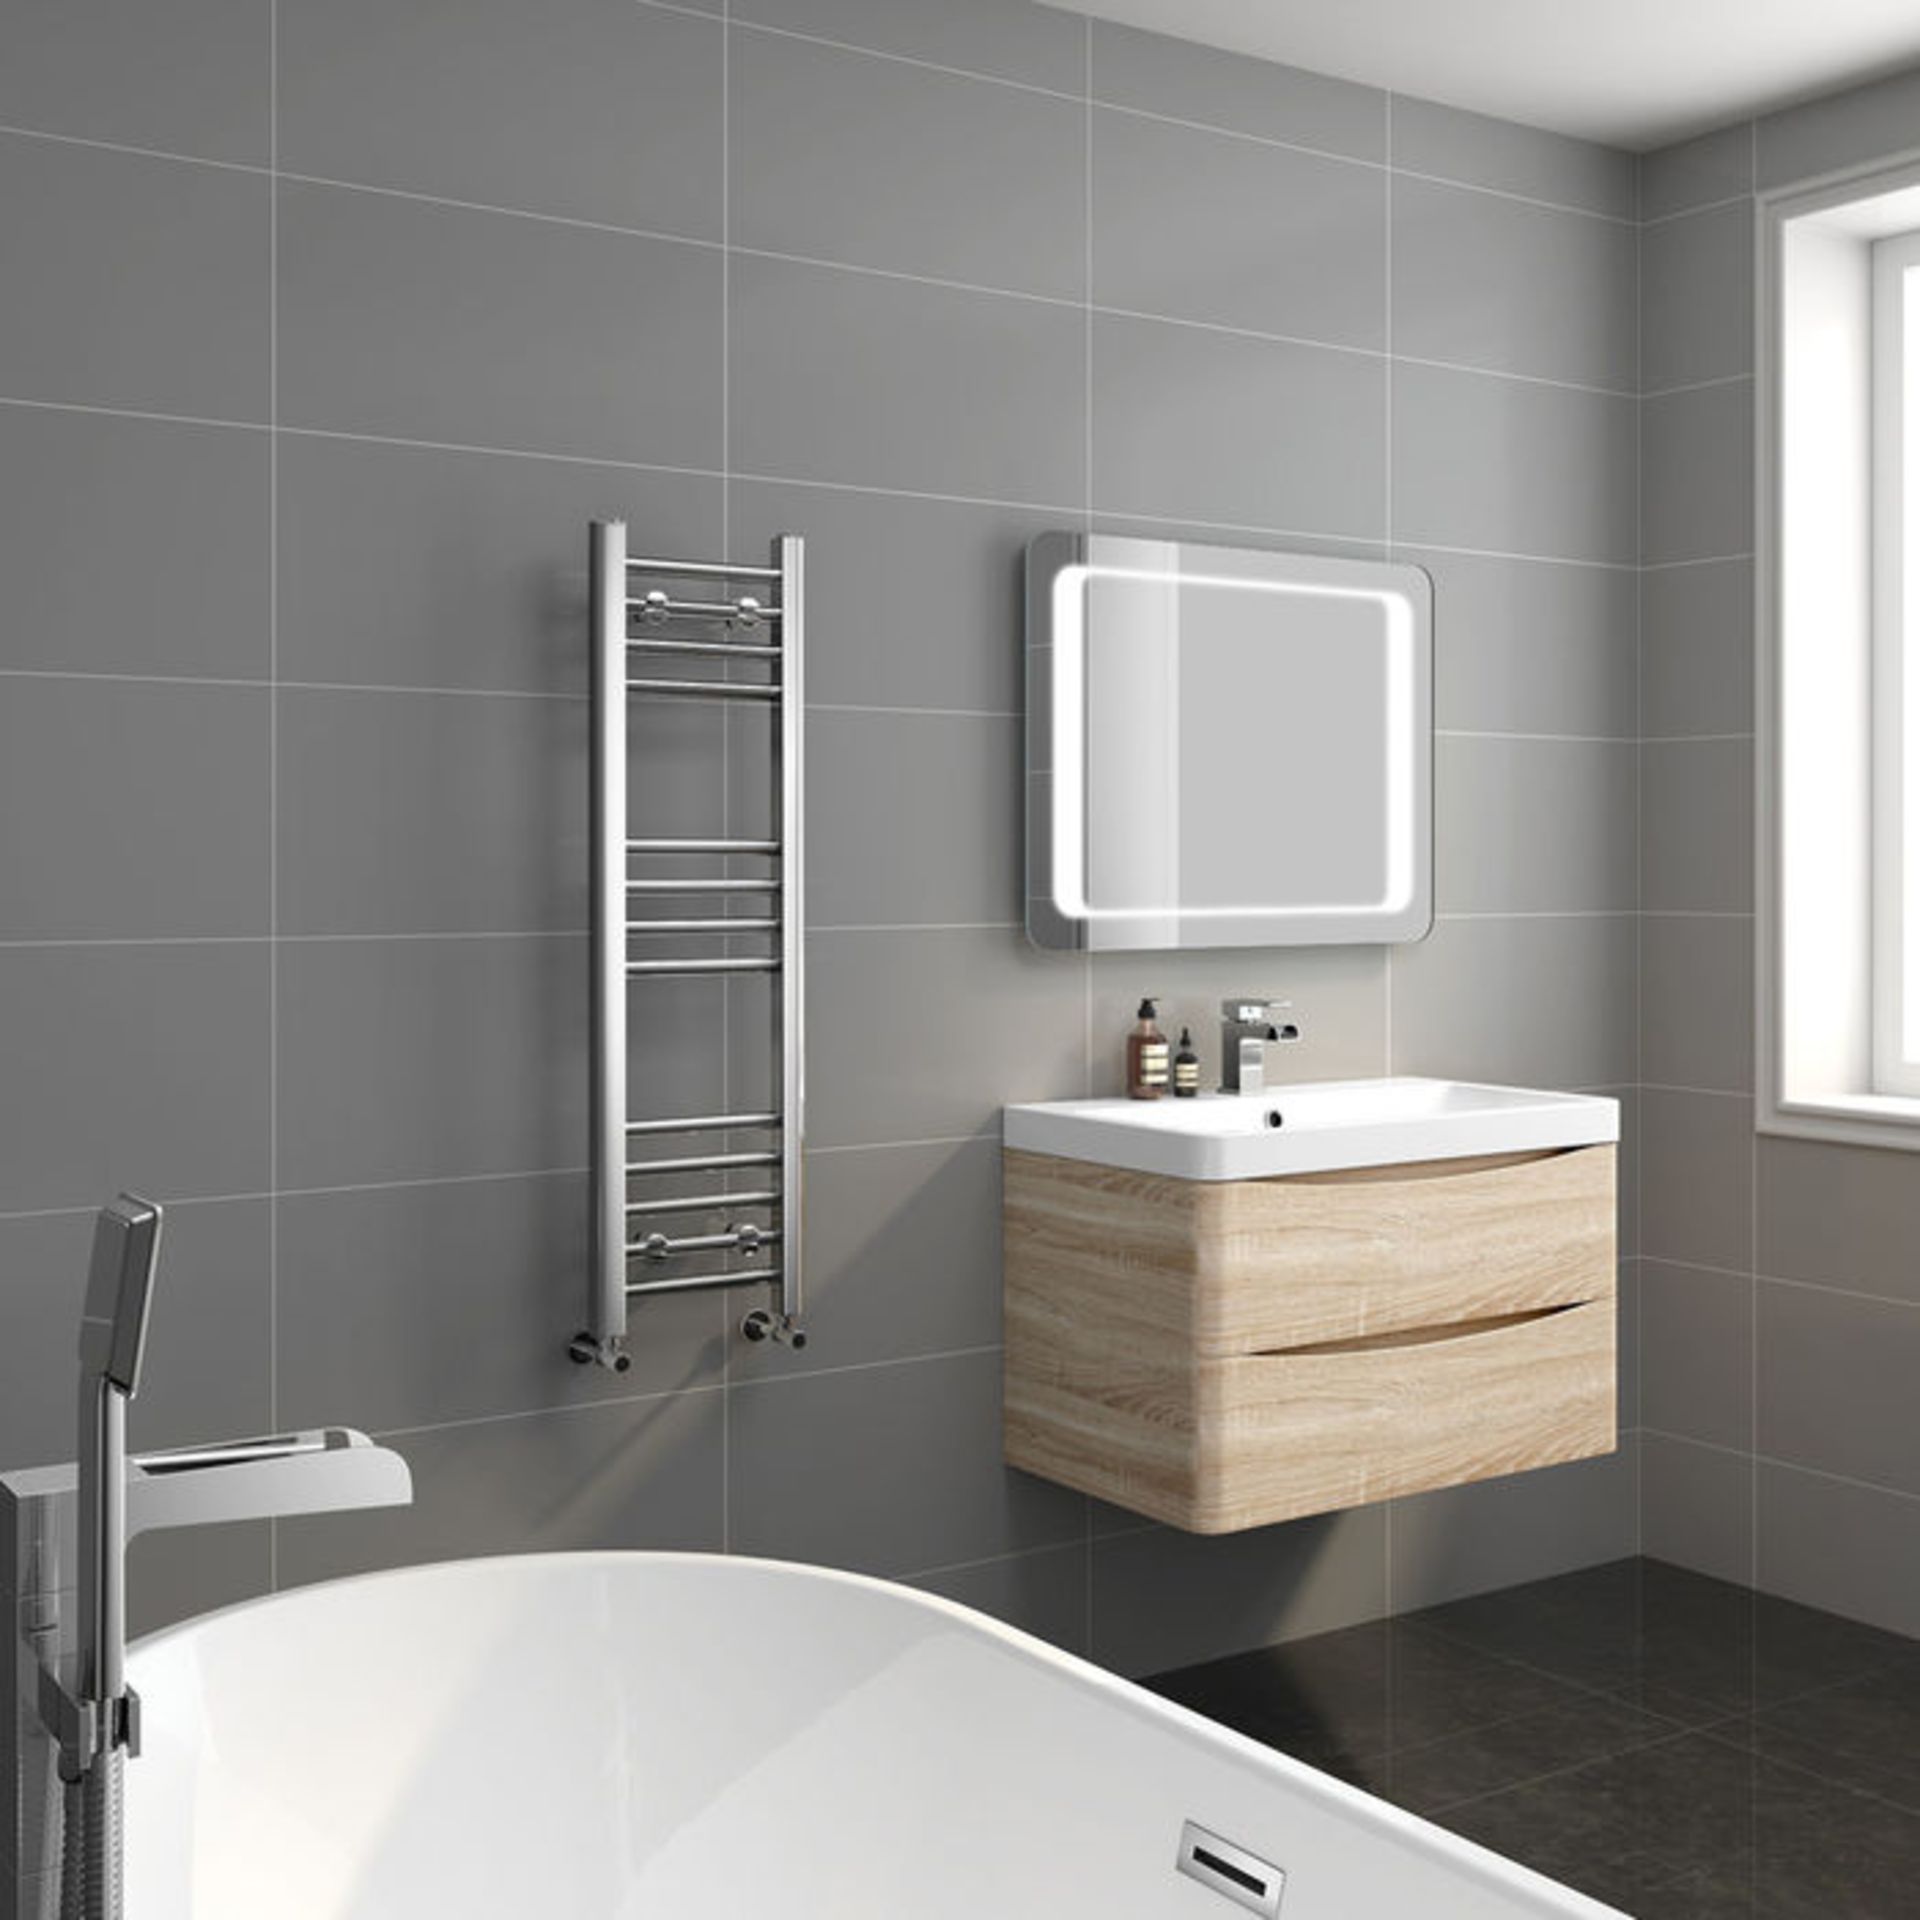 (OS280) 1000x300mm - 20mm Tubes - Chrome Heated Straight Rail Ladder Towel Rail. RRP £185.99. Made - Image 2 of 3